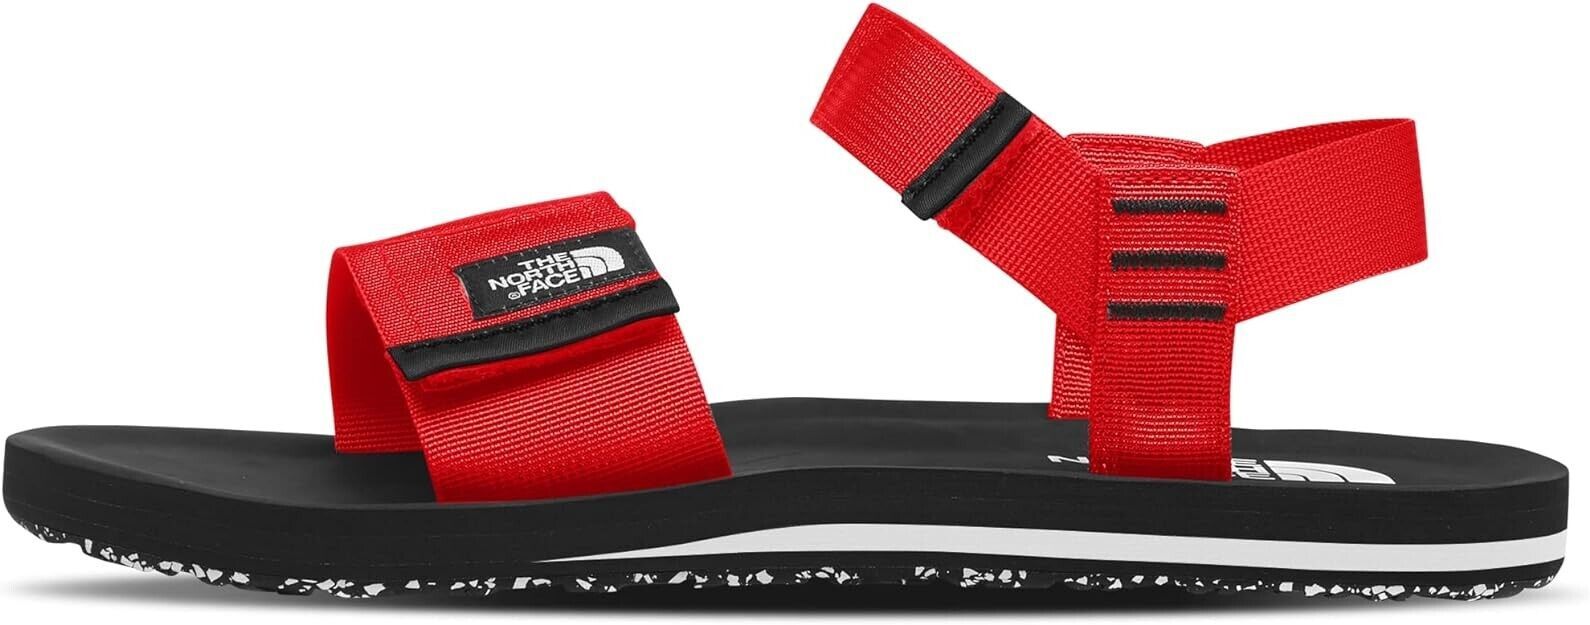 THE NORTH FACE Skeena Sandals Mens 10 Red Black NEW - £34.89 GBP